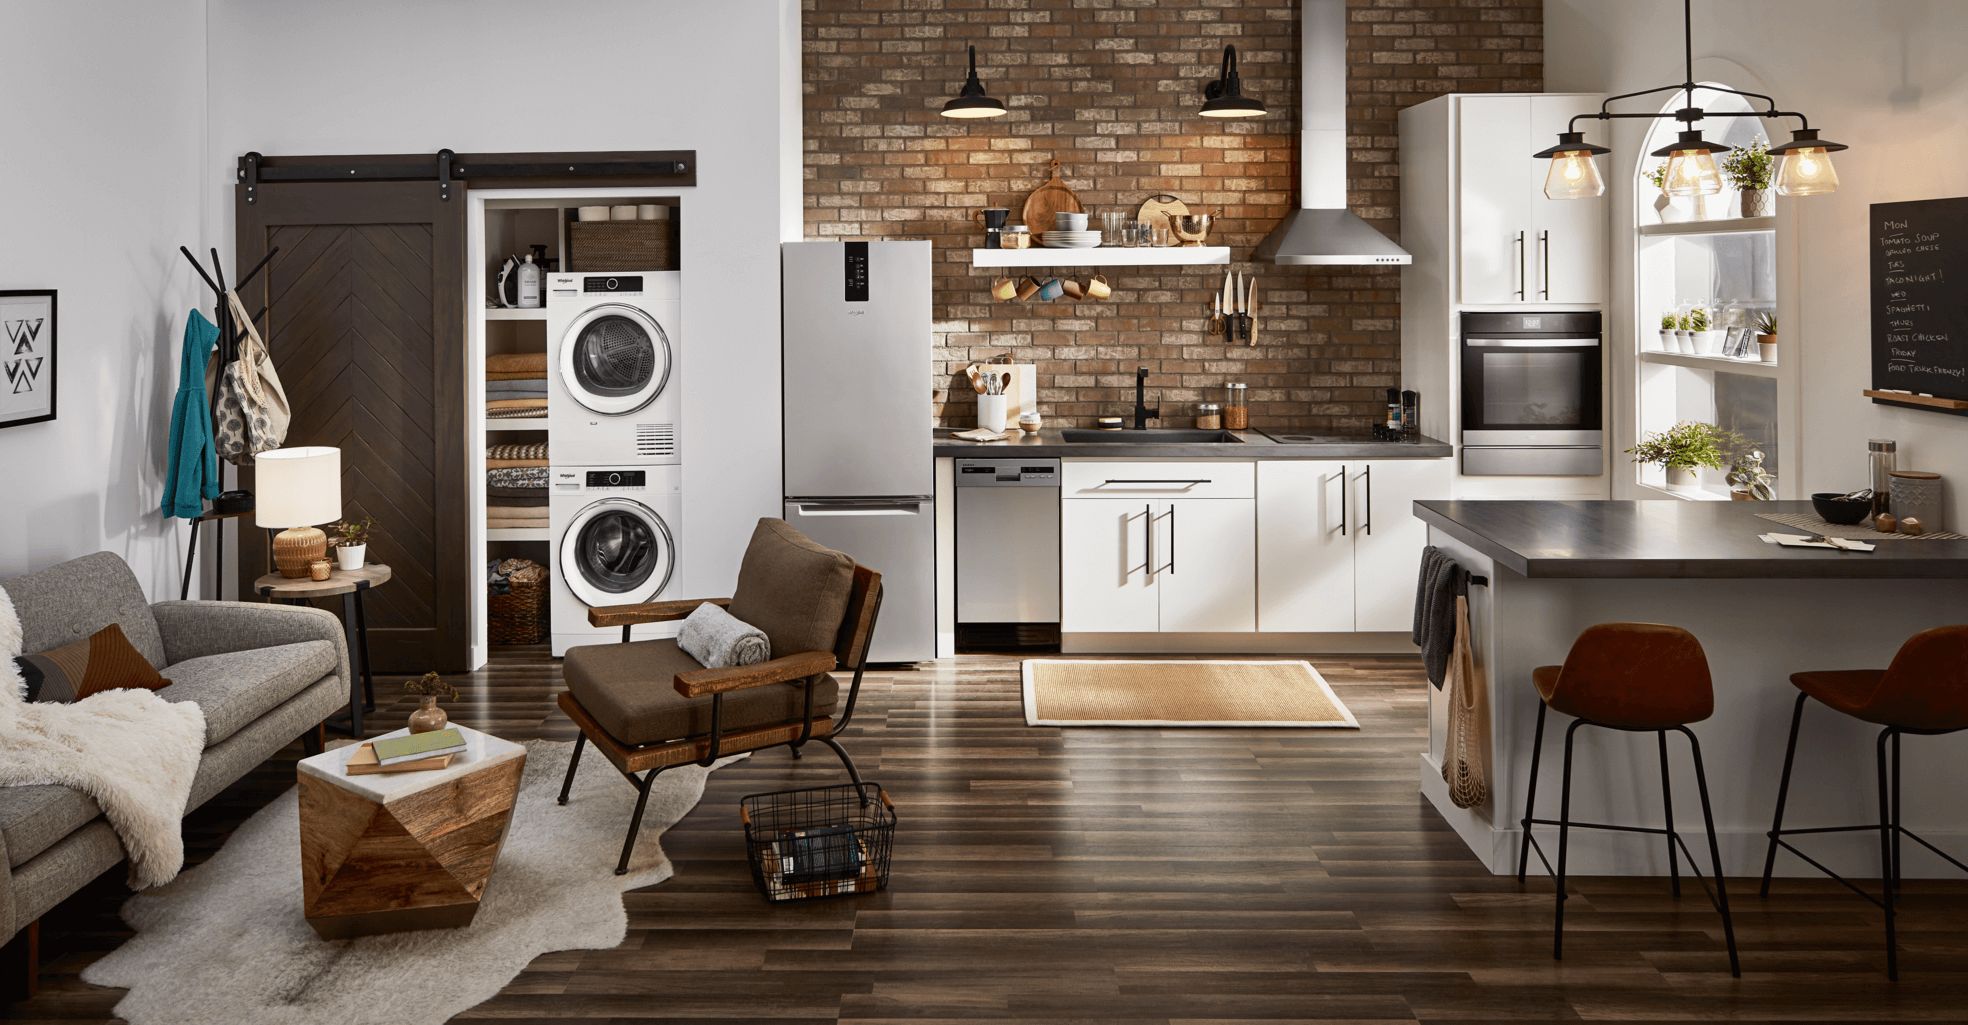 Whirlpool® Small Space Appliances